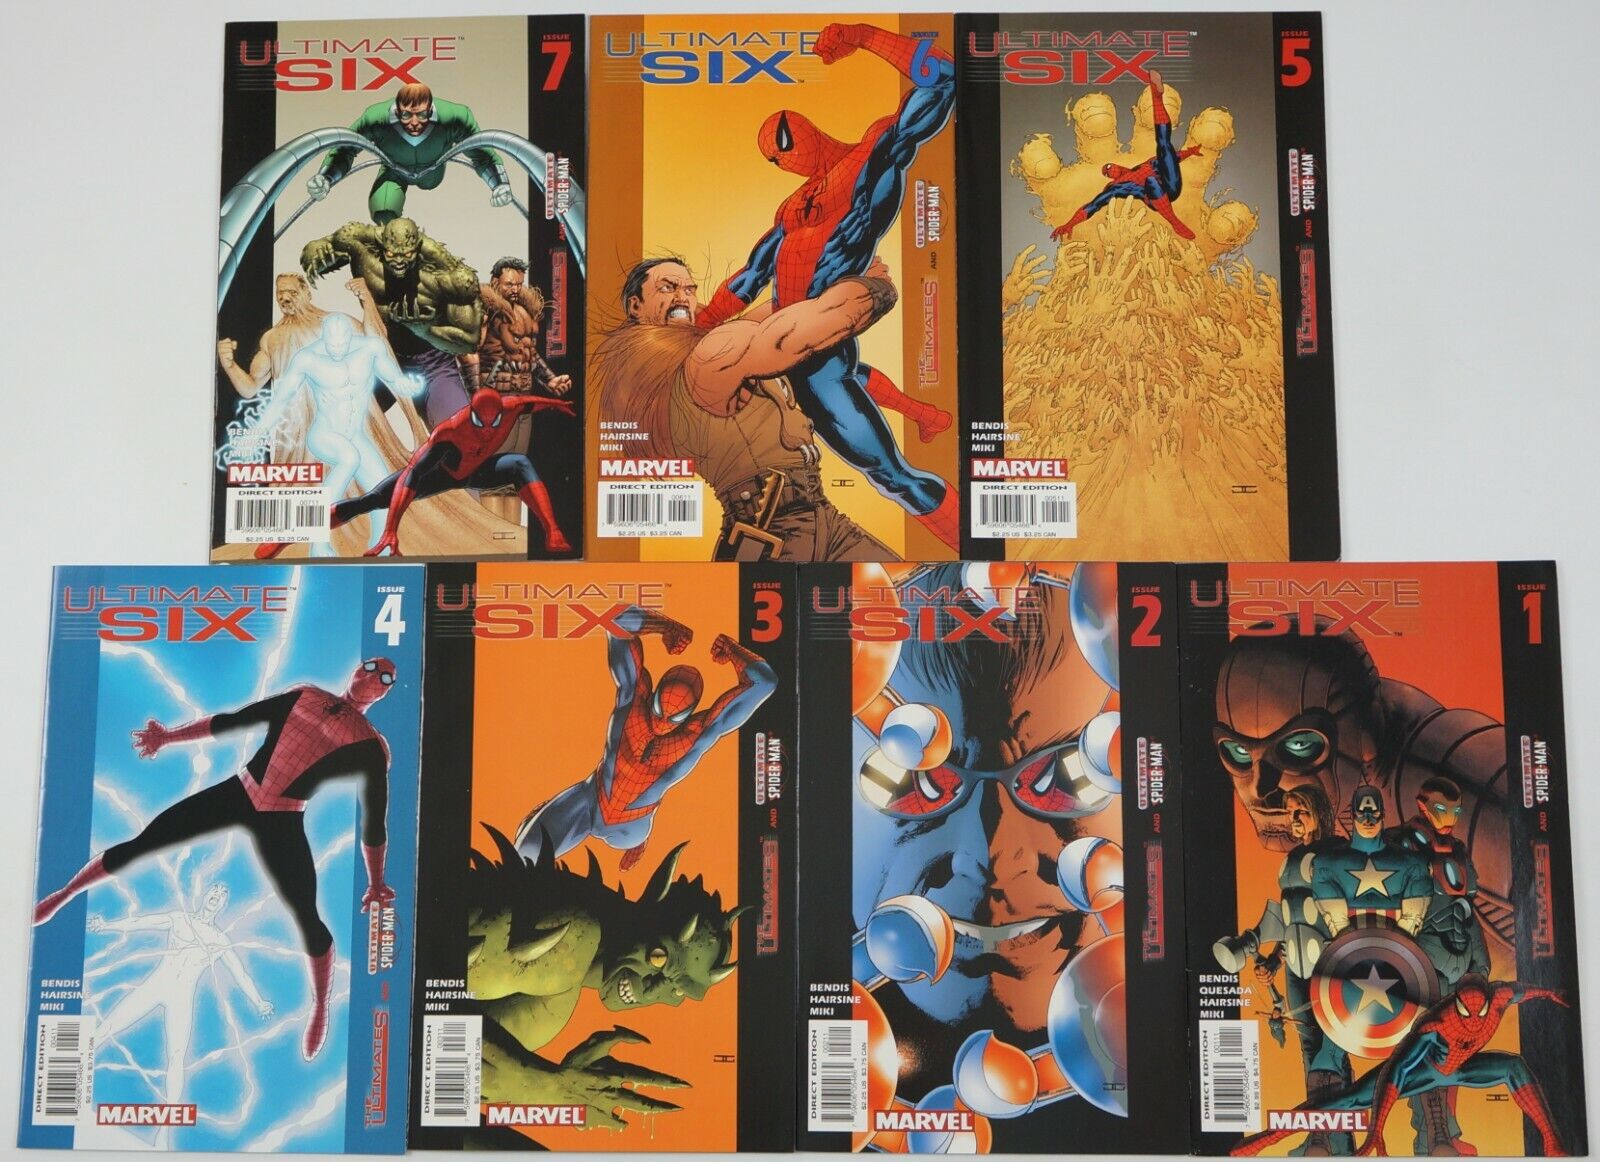 Ultimate Six #1-7 VF/NM complete series - Spider-Man Sinister Six - Bendis set